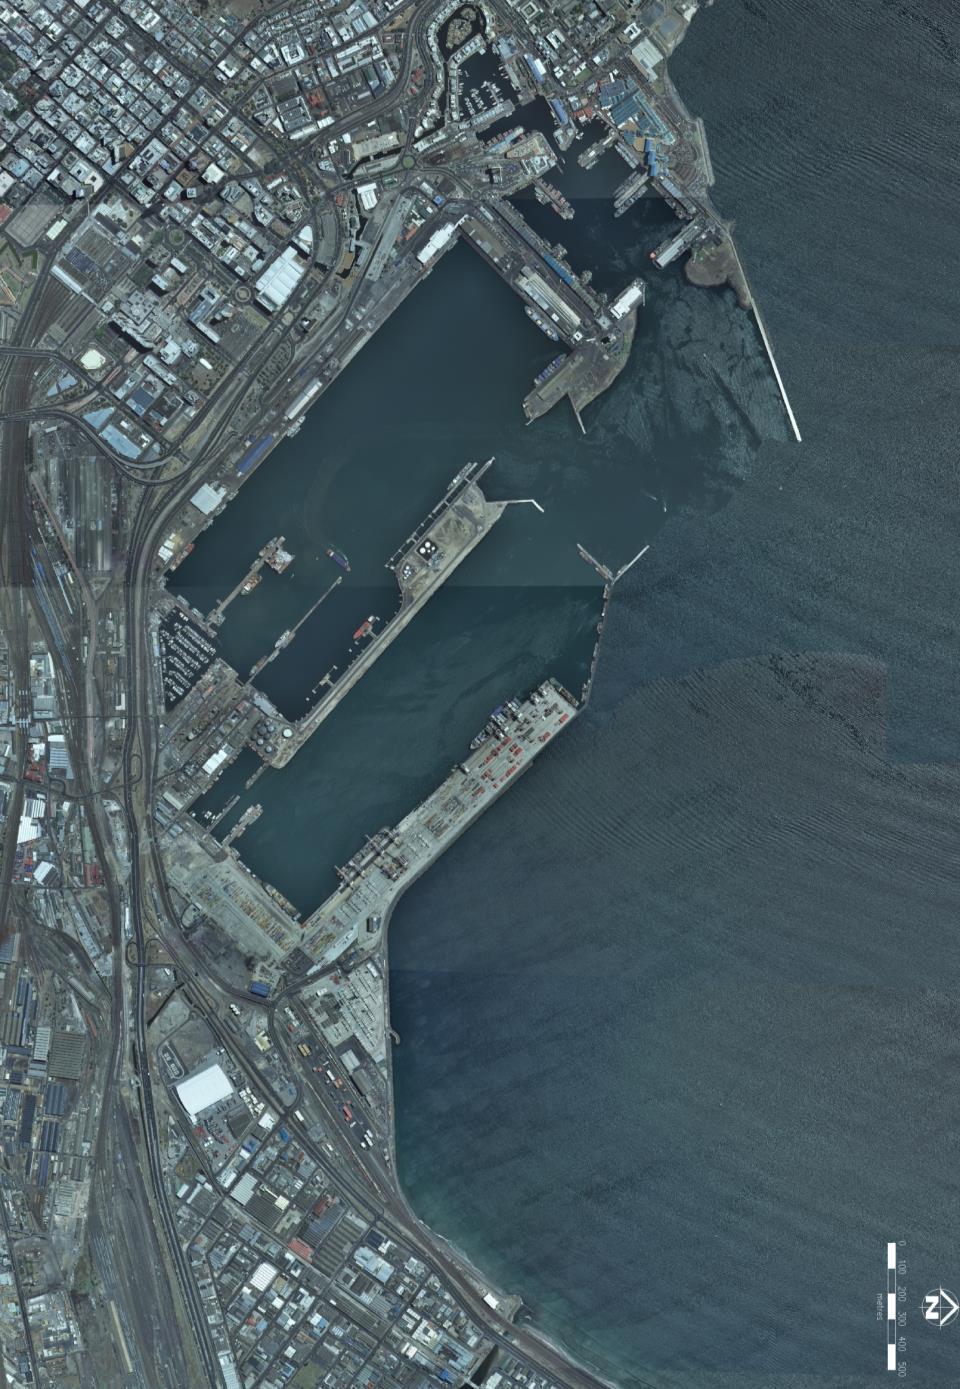 Port of Cape Town Cape Town is the premier port for deciduous, perishable and frozen product exports. Strong ship repair business oil & gas, off-shore platforms, dedicated facility at A-Berth.